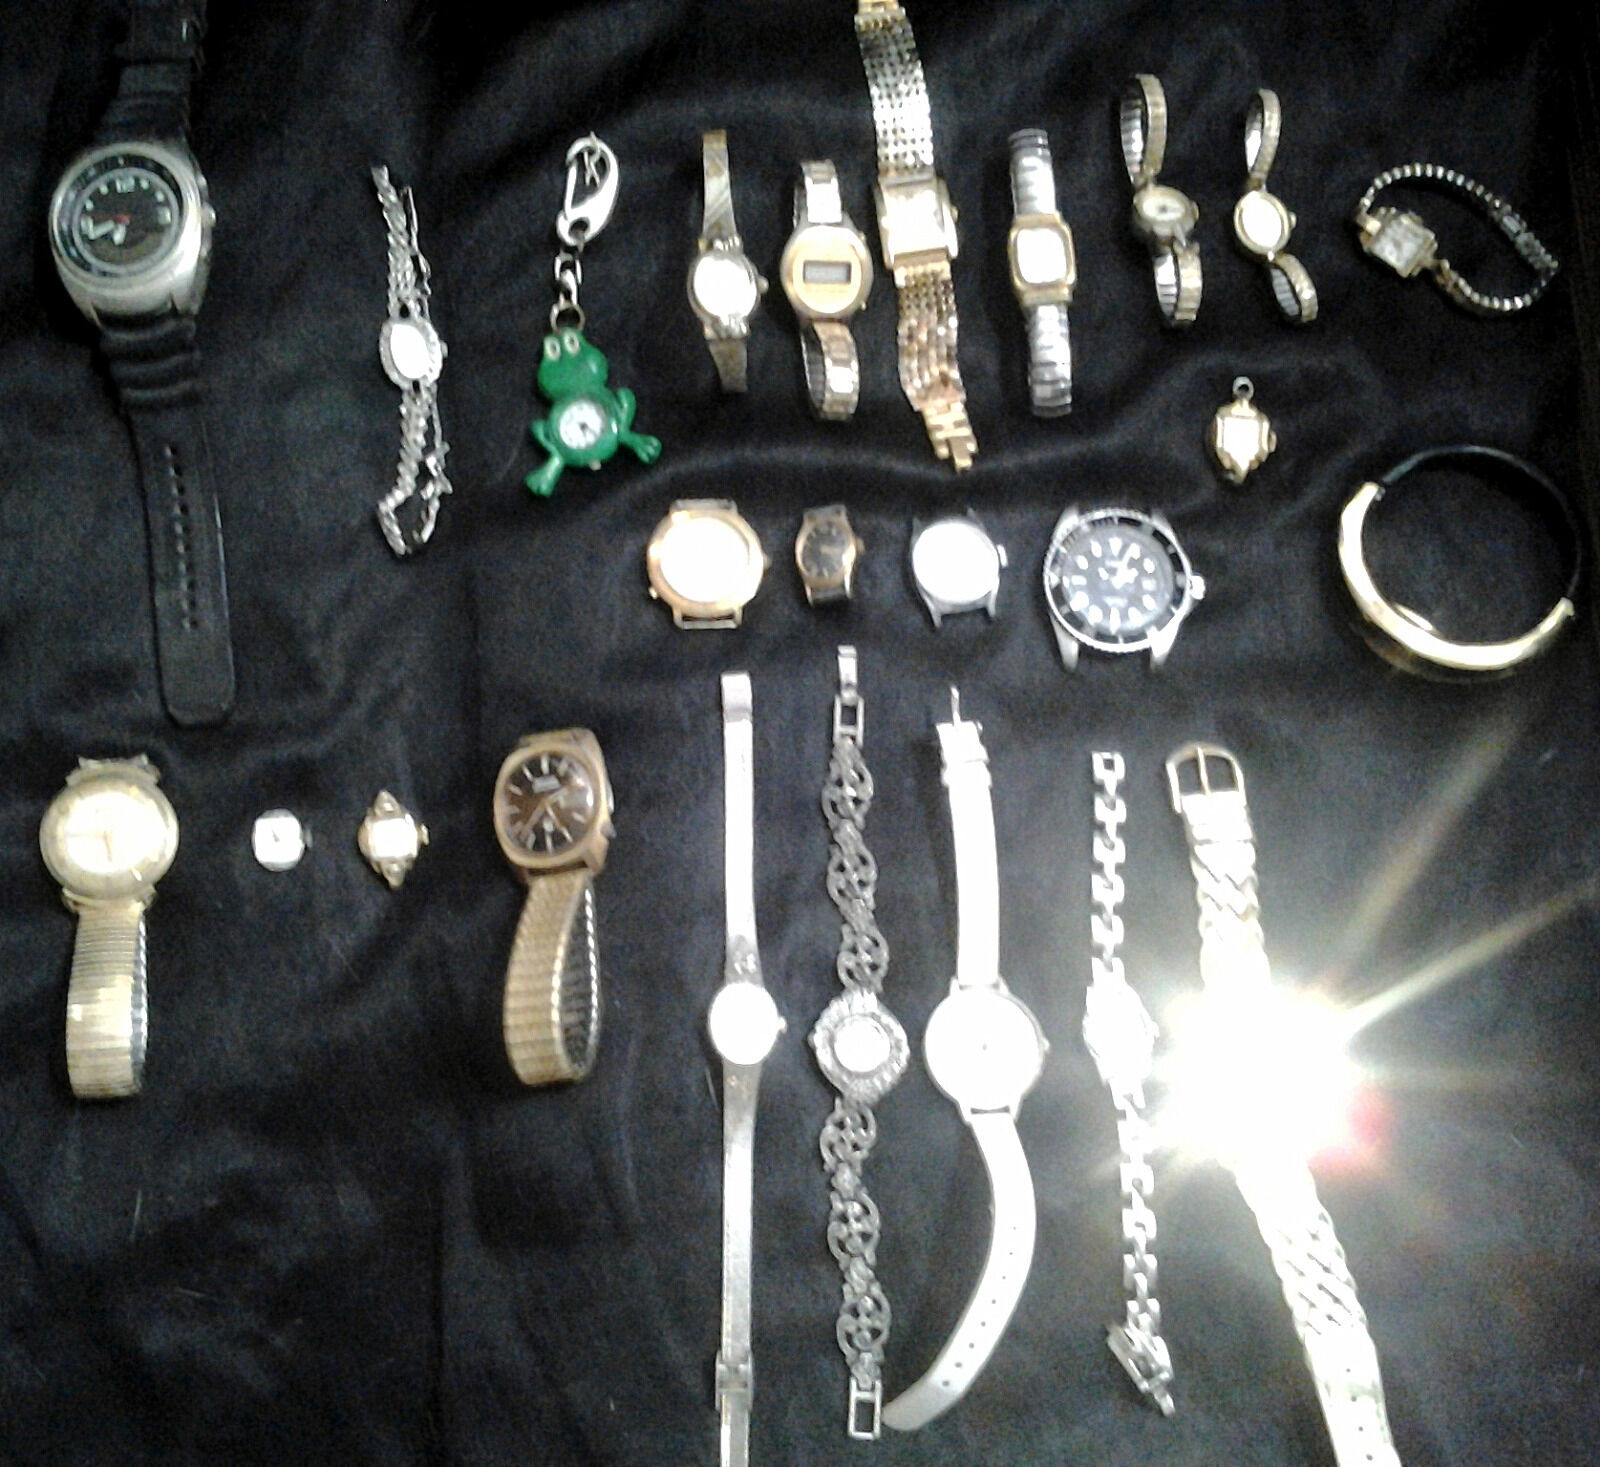 MORE THAN 20 ASSORTED WATCHES INCLUDING BULOVA